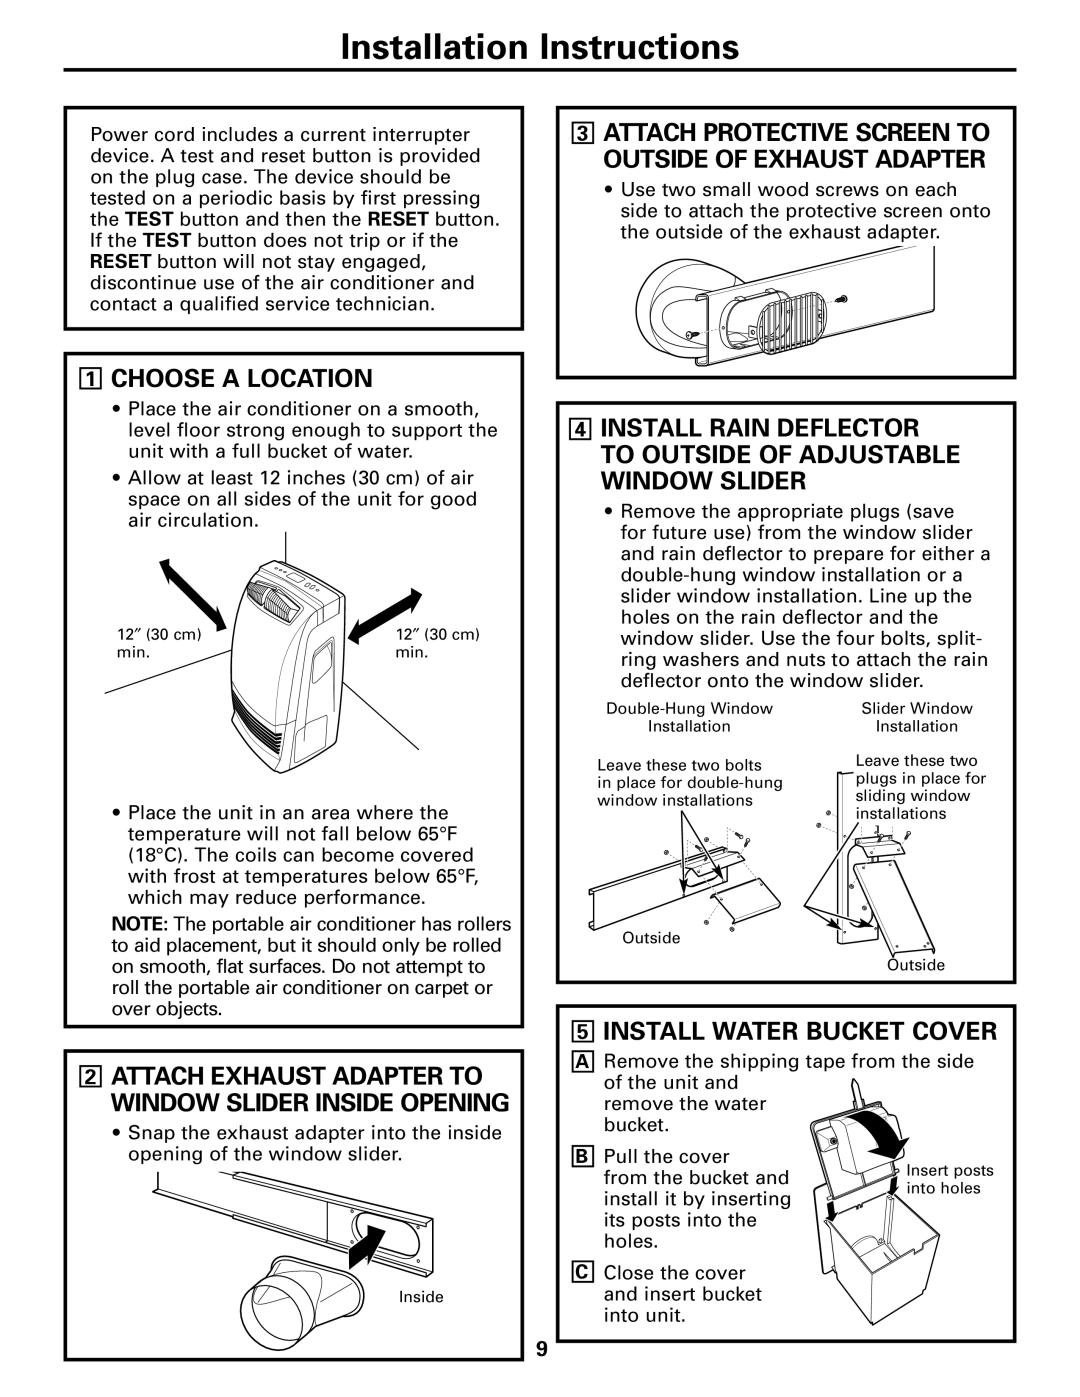 GE APE08 installation instructions 1CHOOSE A LOCATION, 5INSTALL WATER BUCKET COVER, Installation Instructions 